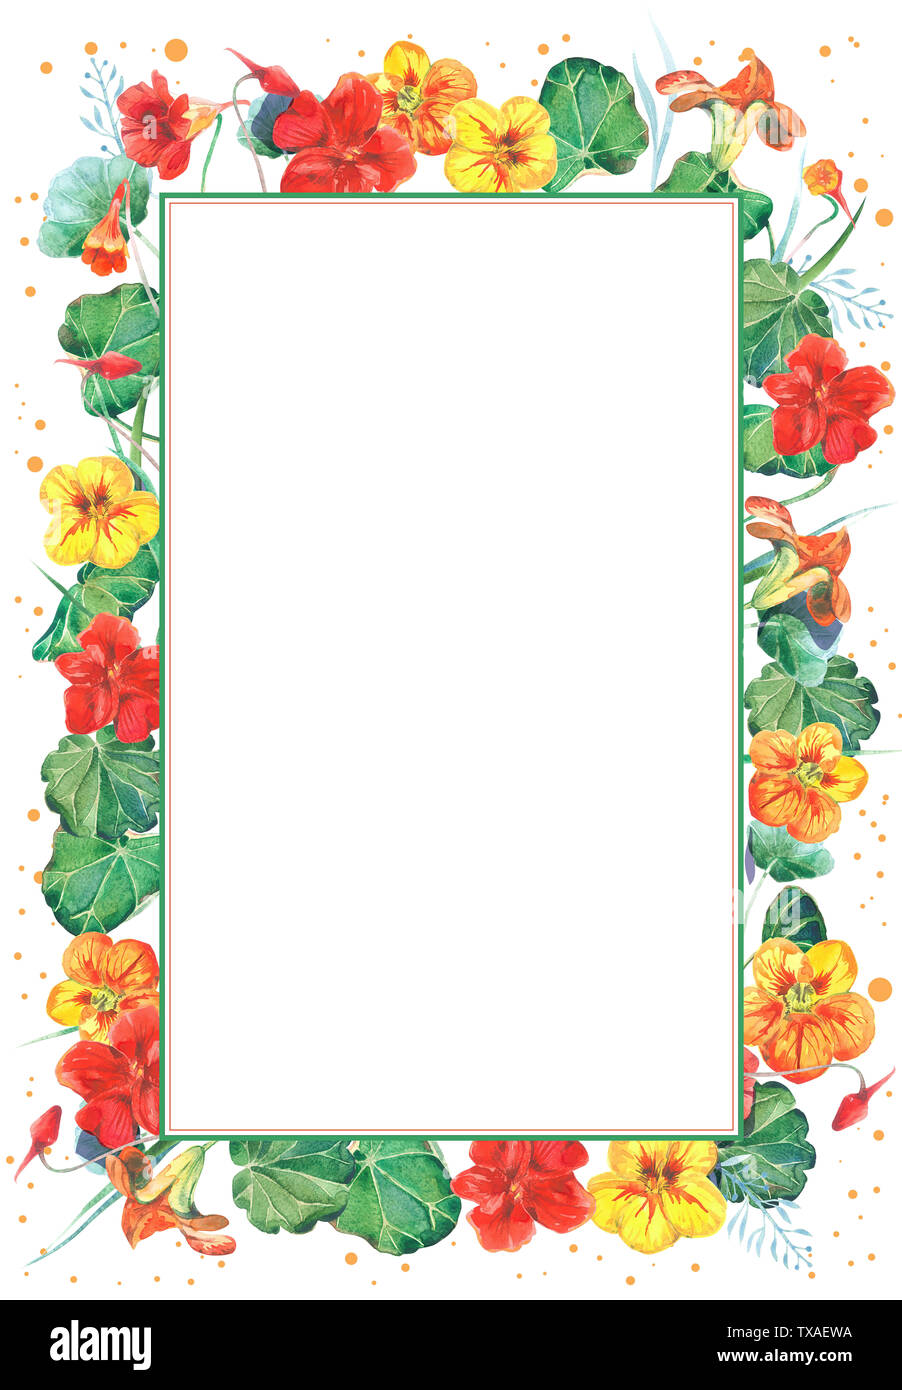 Watercolor frame template with nasturtium flowers. Hand drawn watercolor illustration. Stock Photo